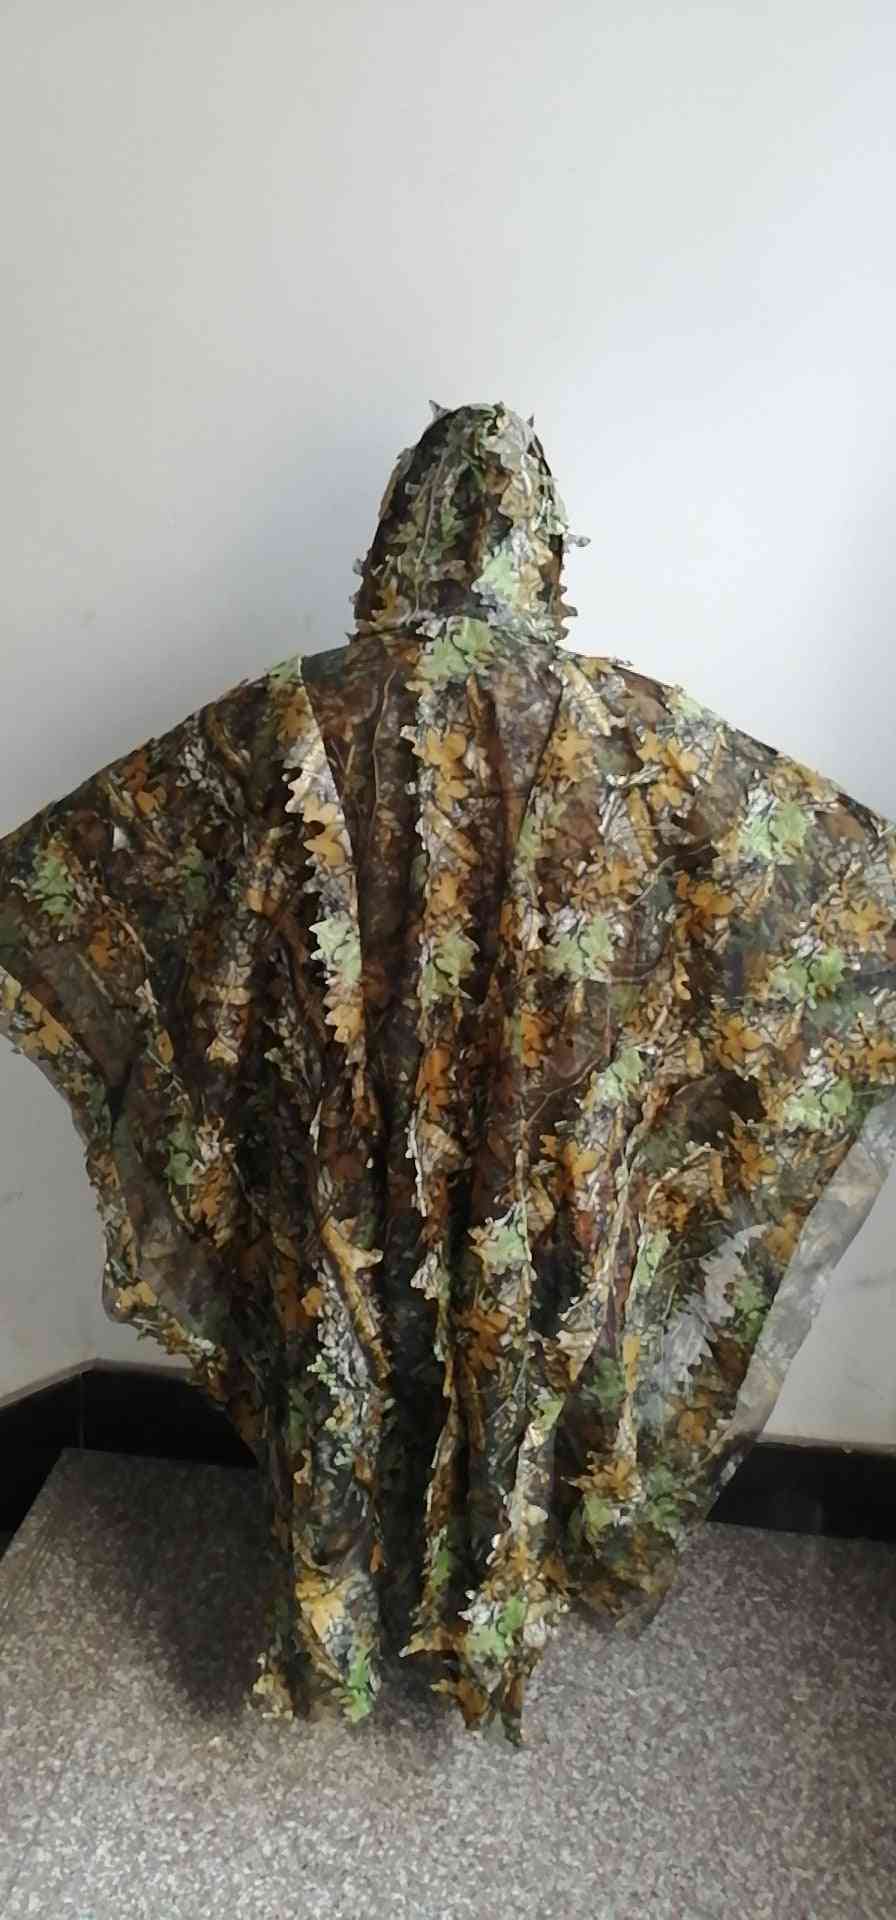 Leafy Poncho Jungle Ghillie Suits, Hunting Camouflage 3d Bionic Leaf